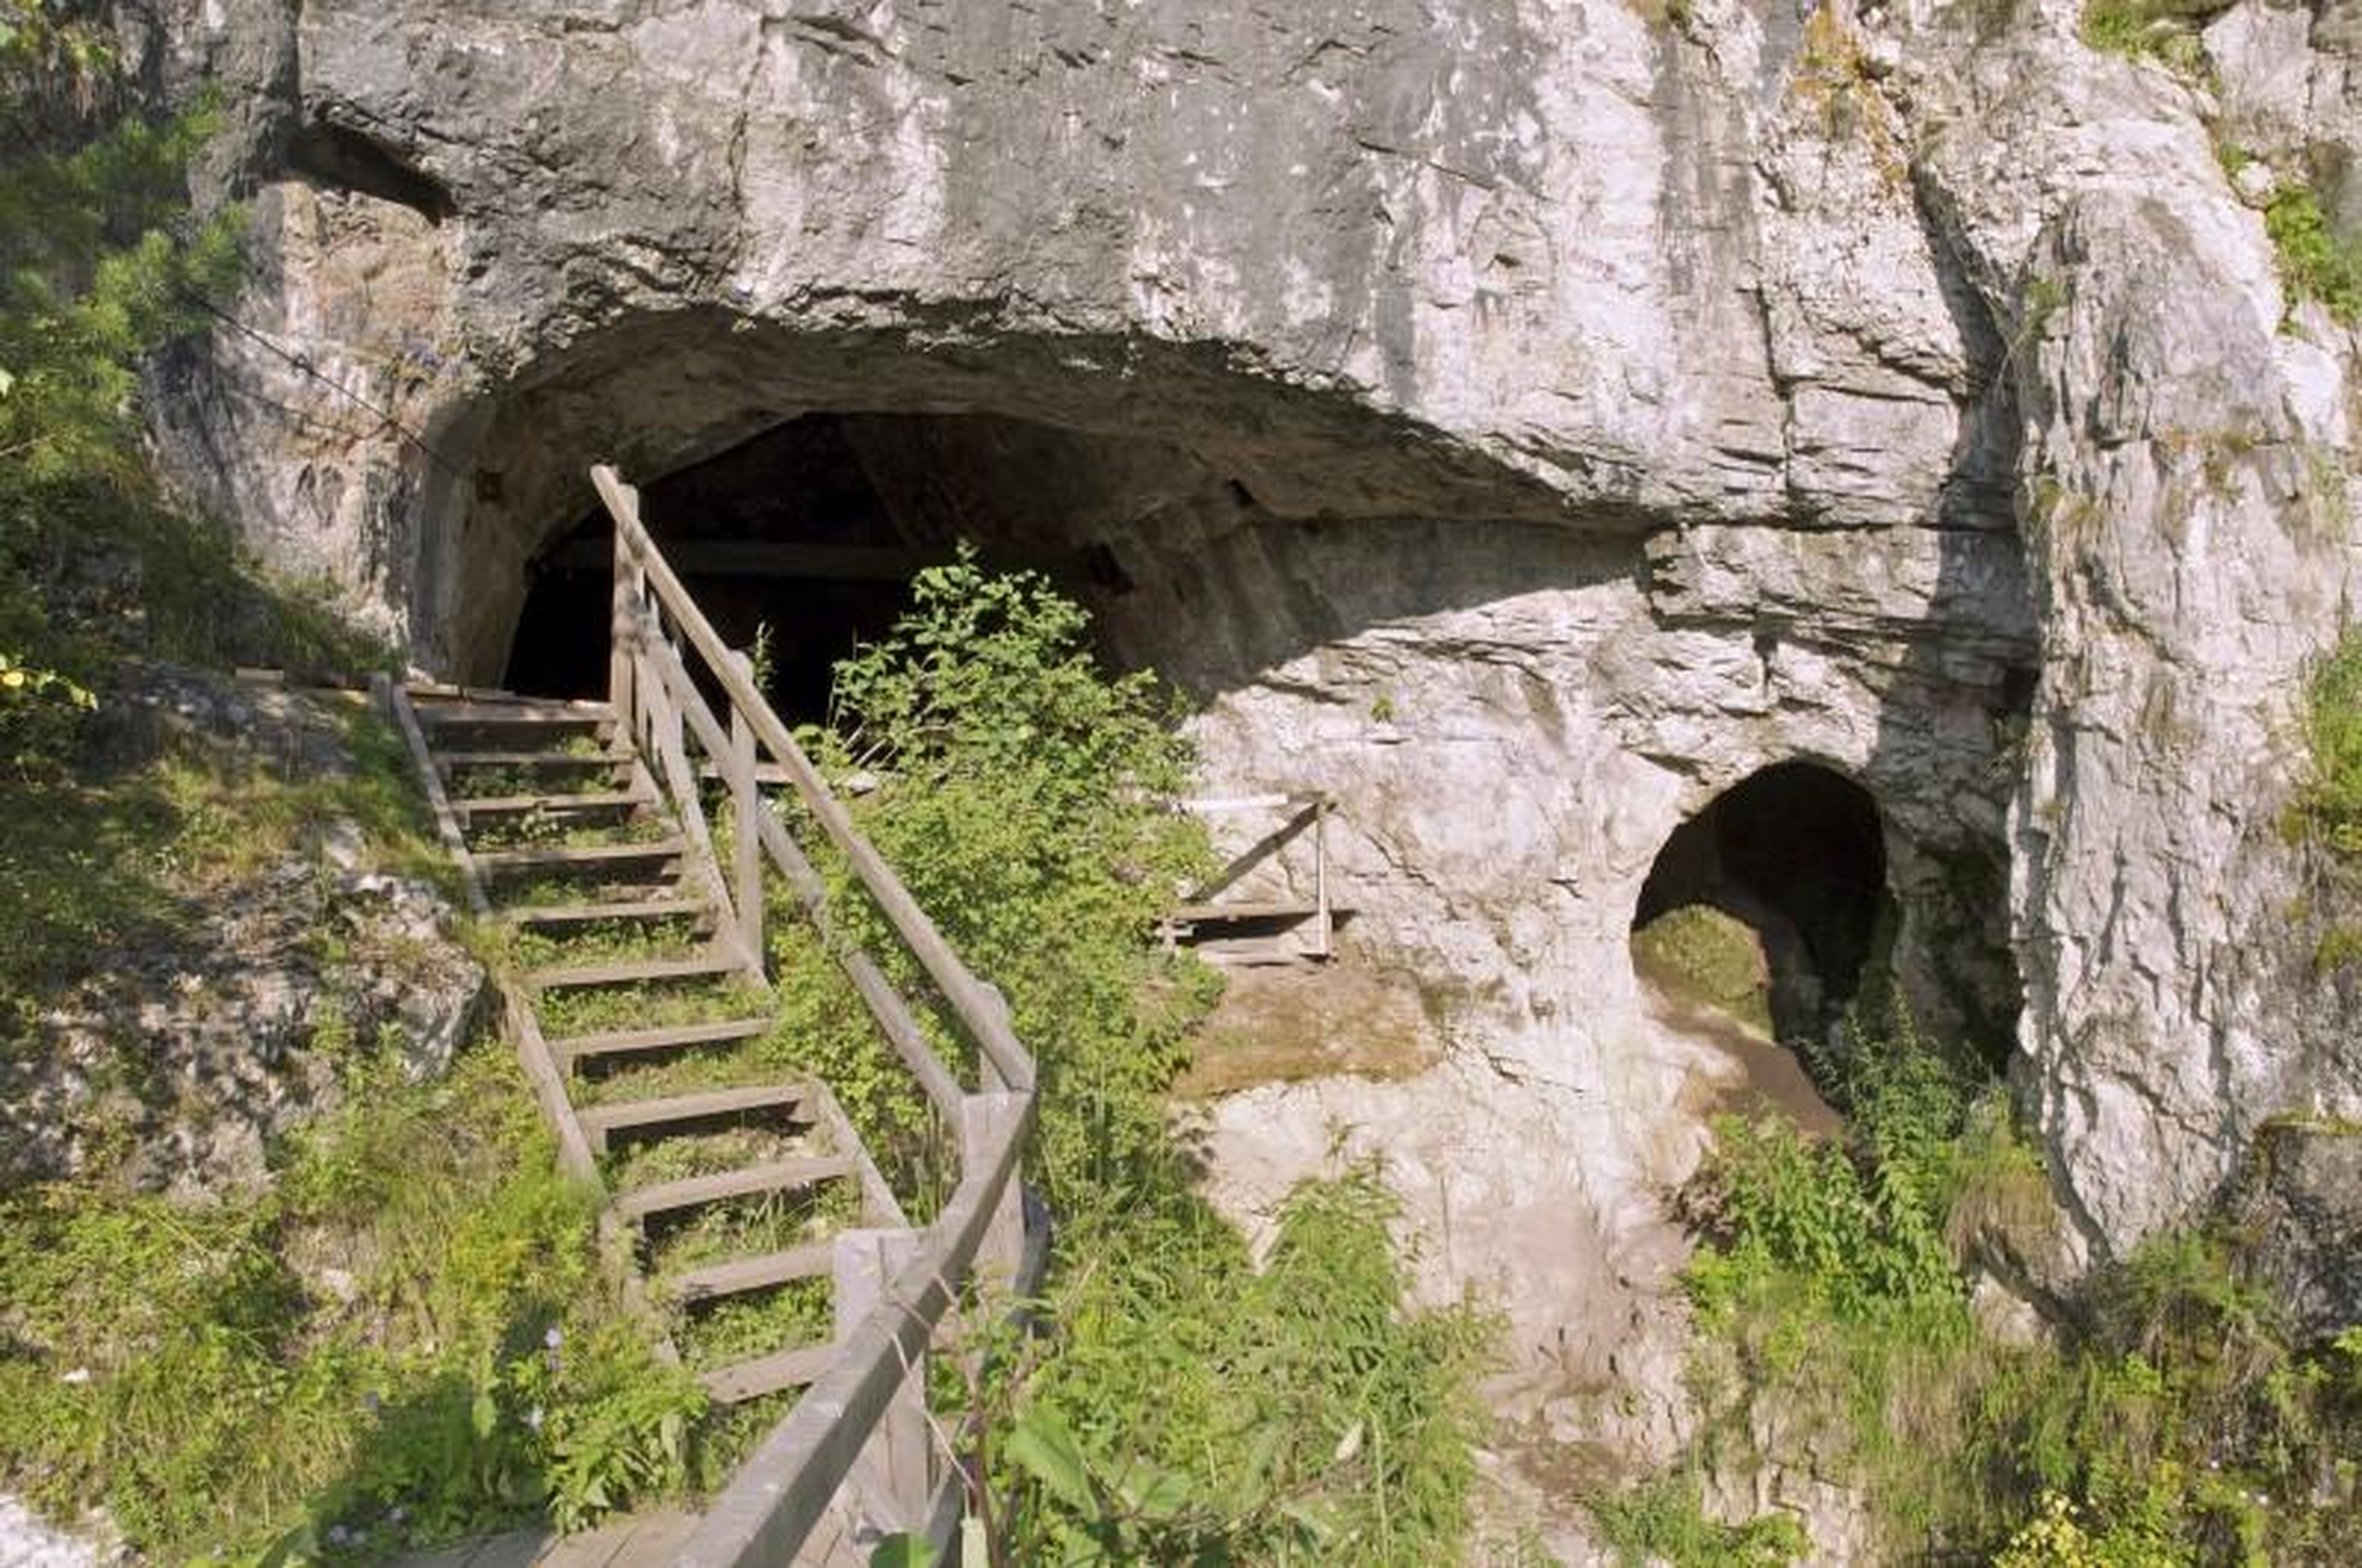 The entrance to Denisova Cave in the Altai Mountains in southern Siberia near the Russia-Mongolia border.